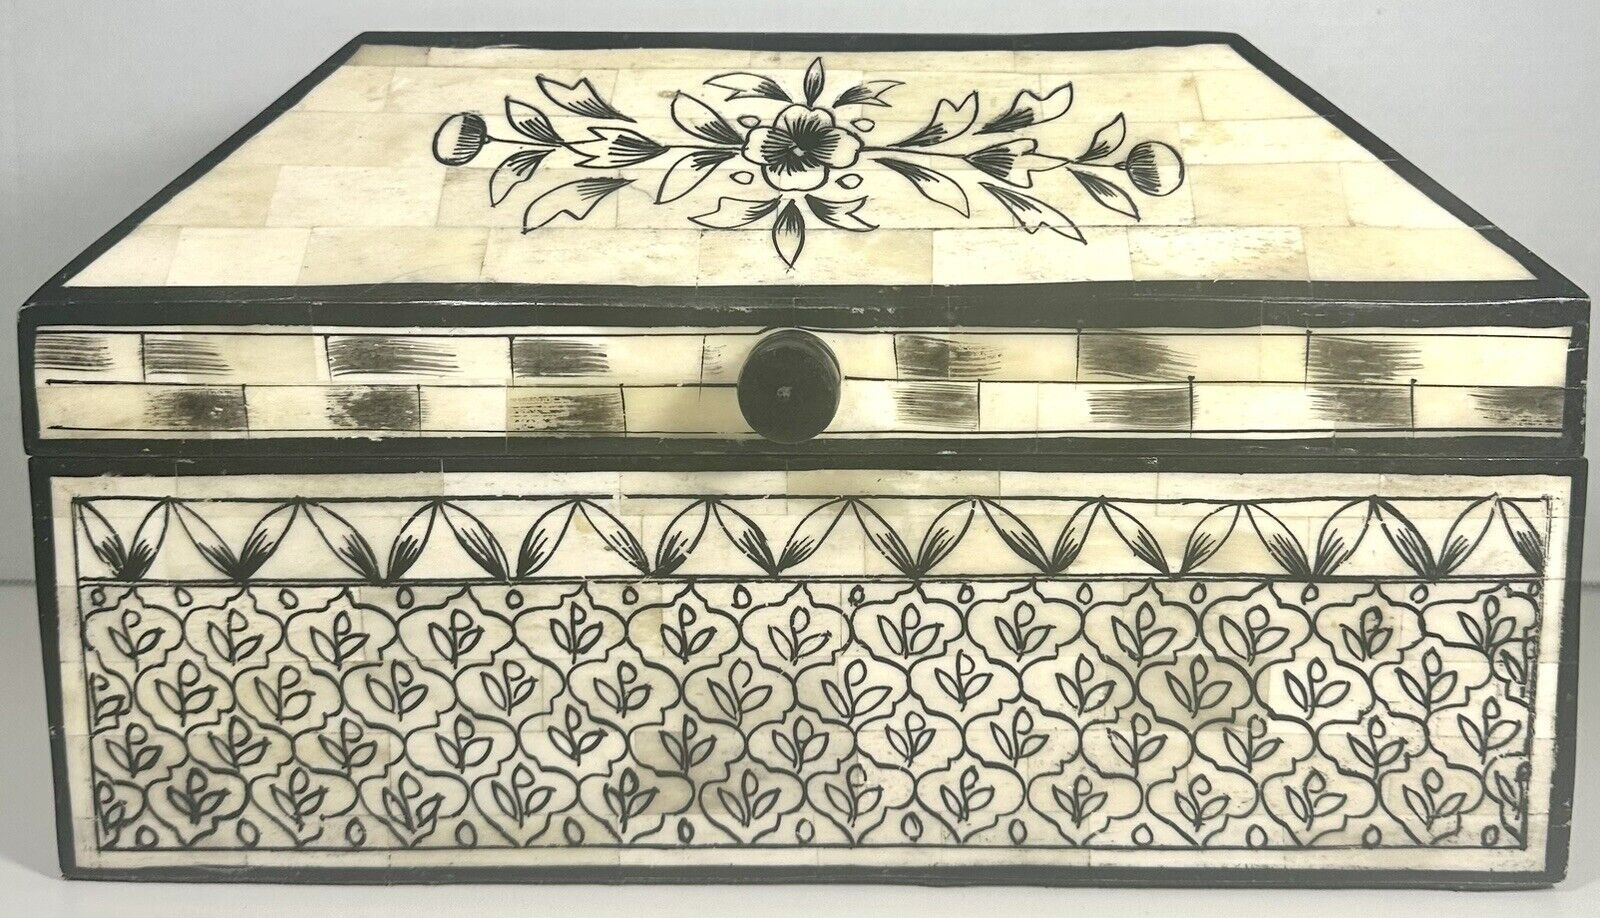 Bone Inlay on Wood Hinged Dresser Box Hand Painted Floral Patterns 